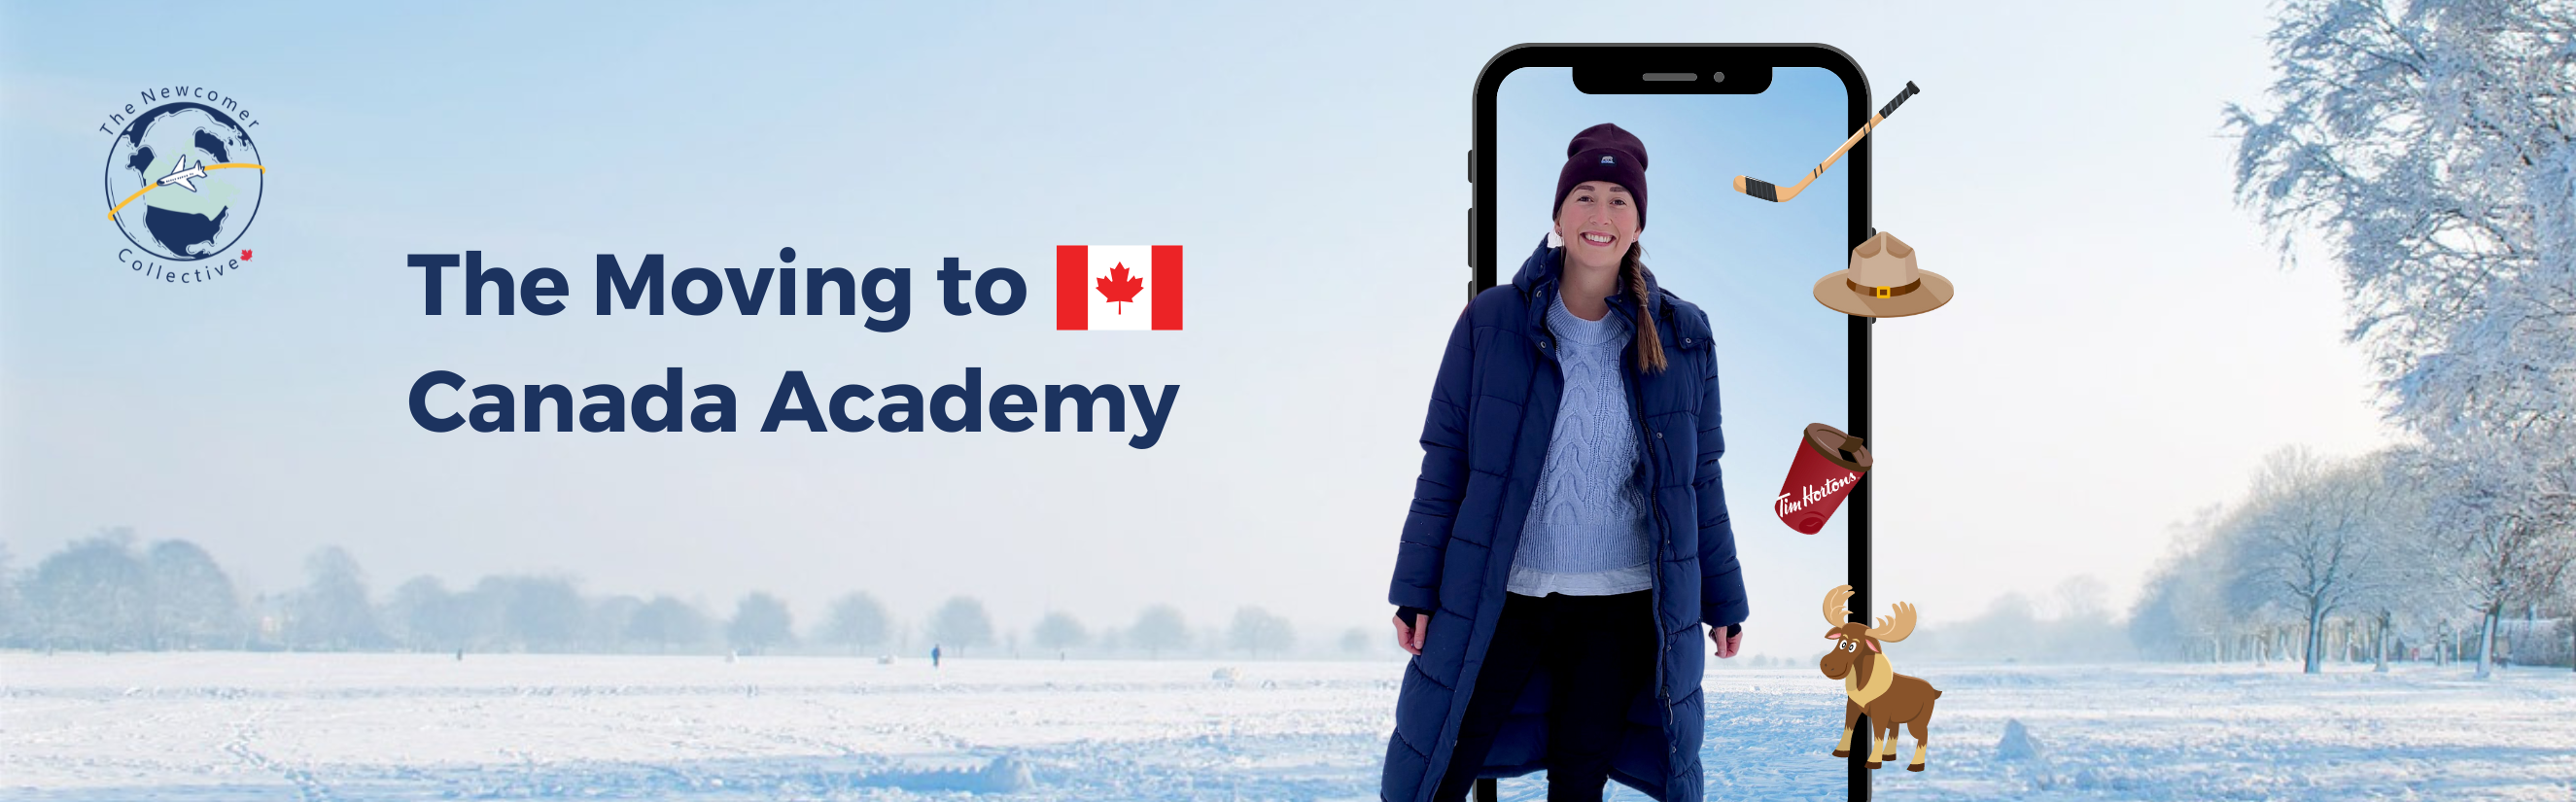 The Moving to Canada Academy